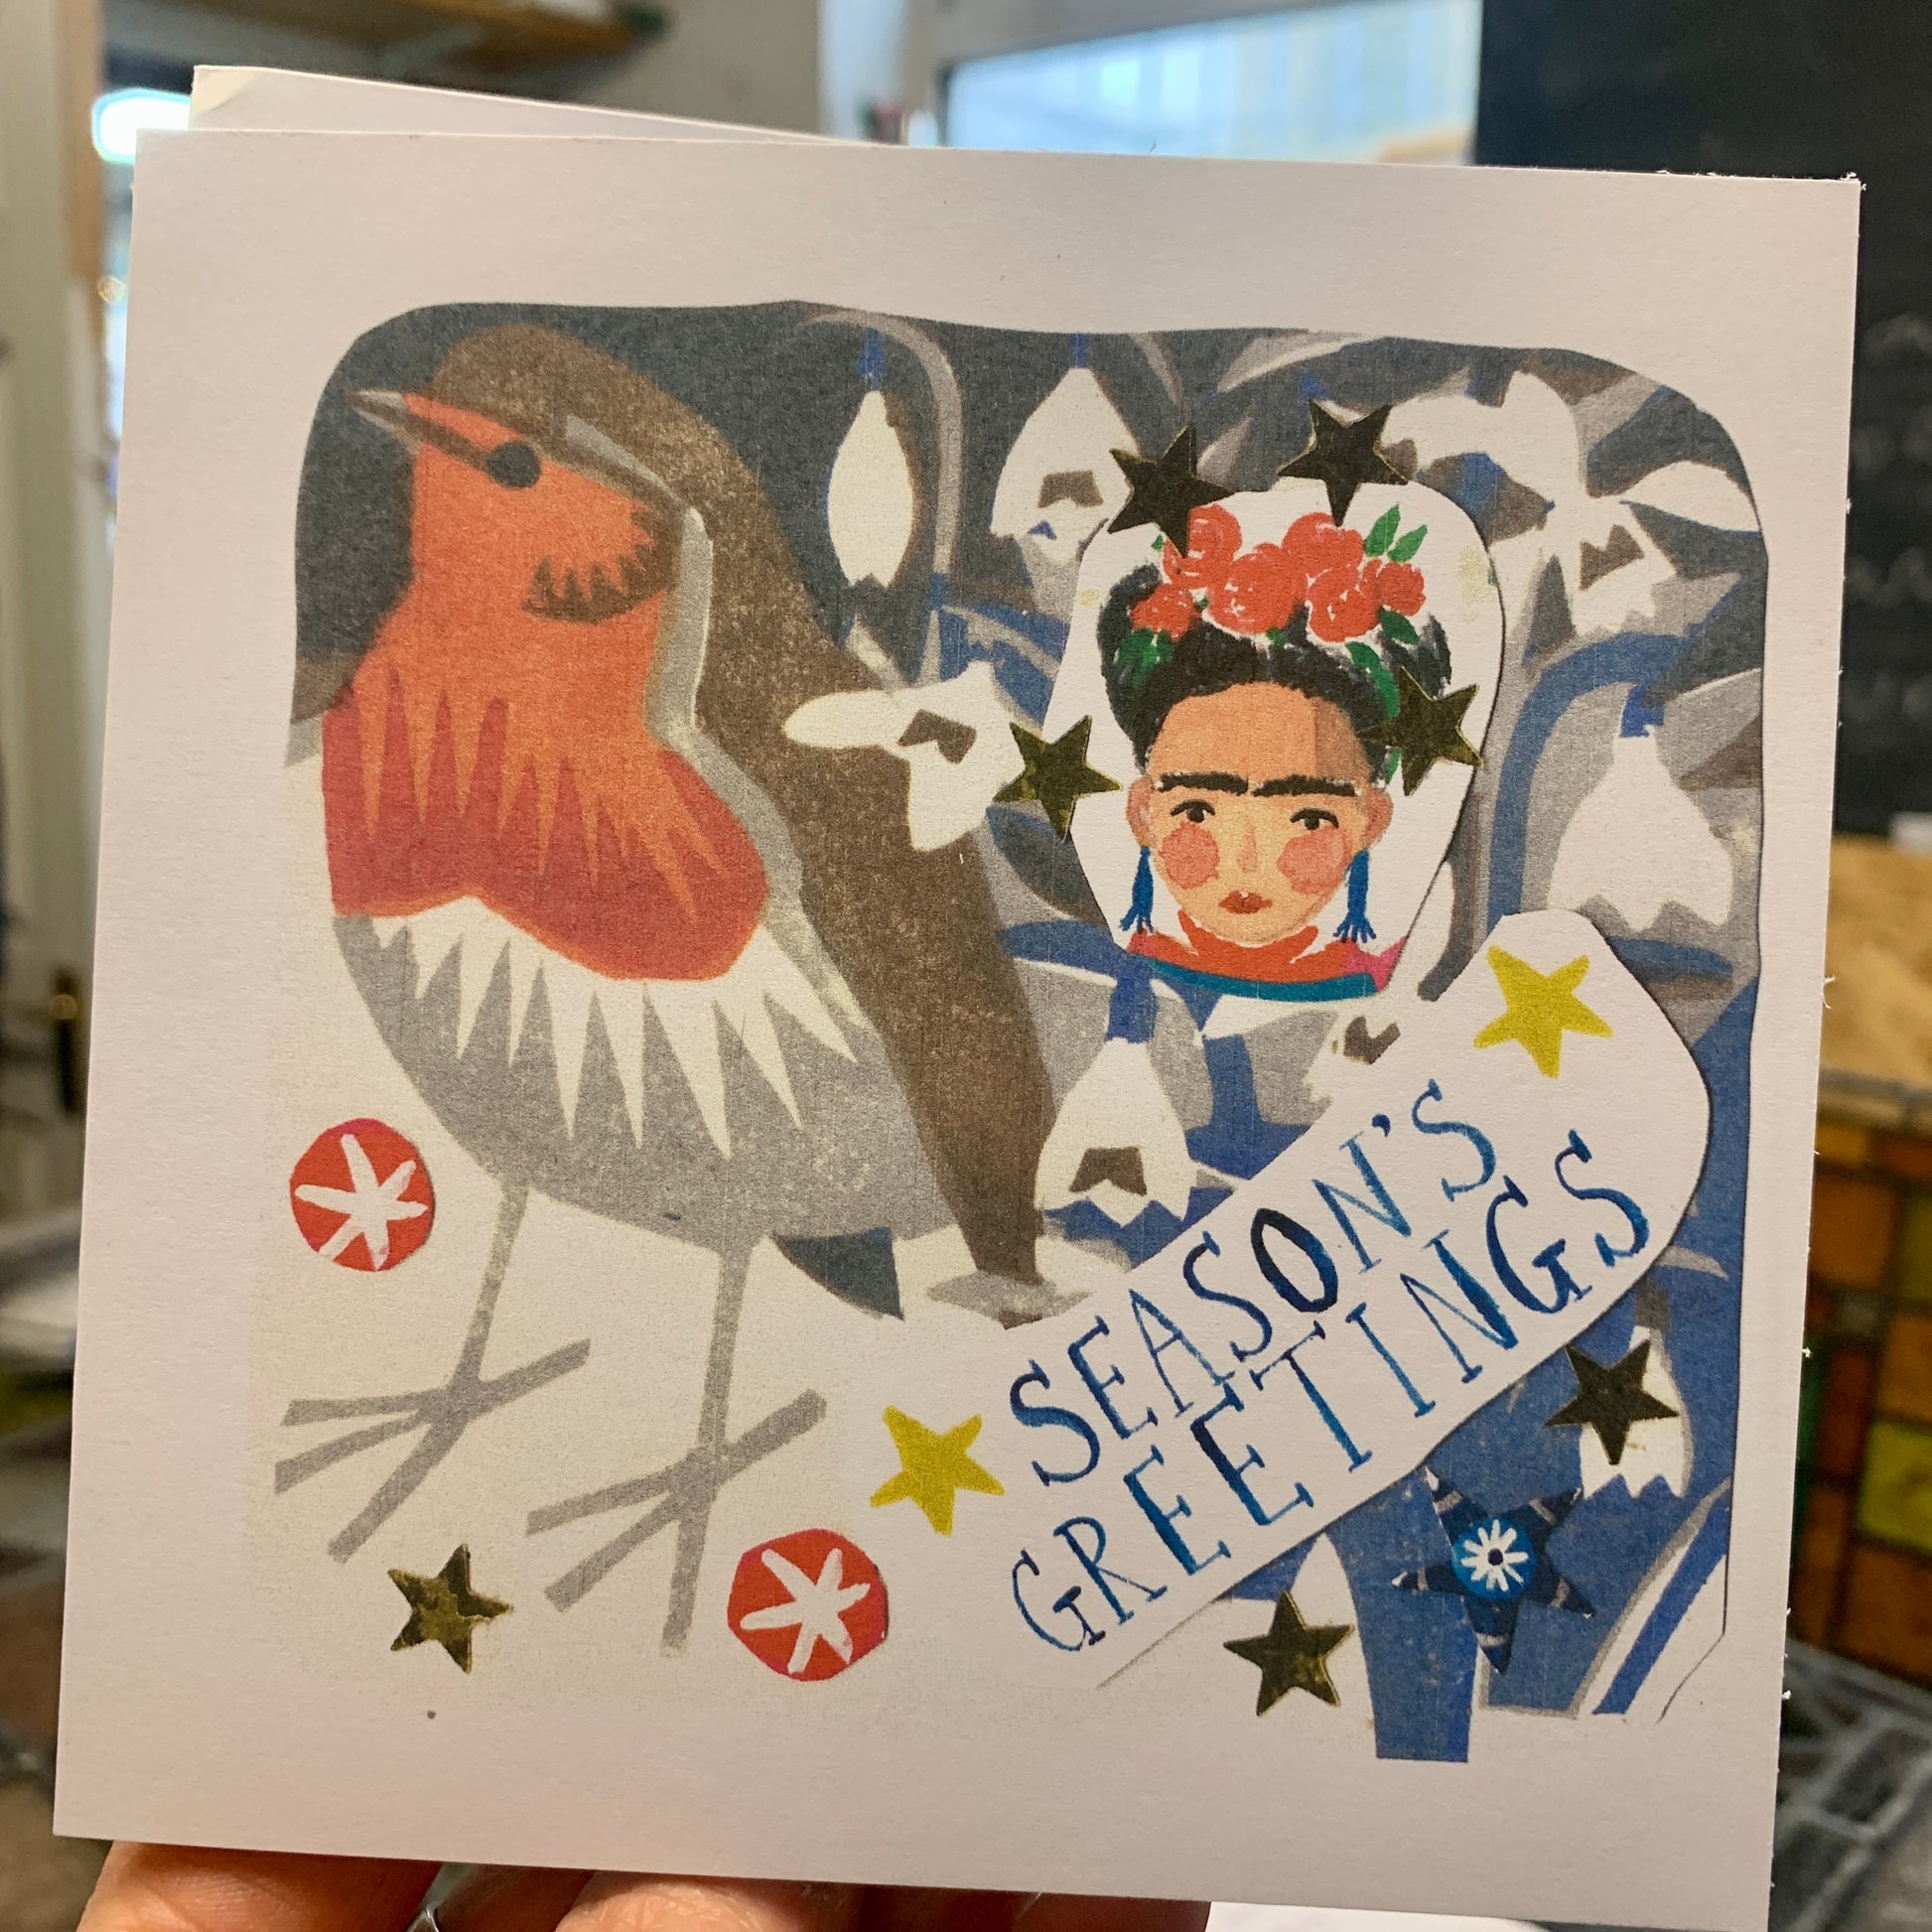 A collage image of Frida and robin with seasons greetings card